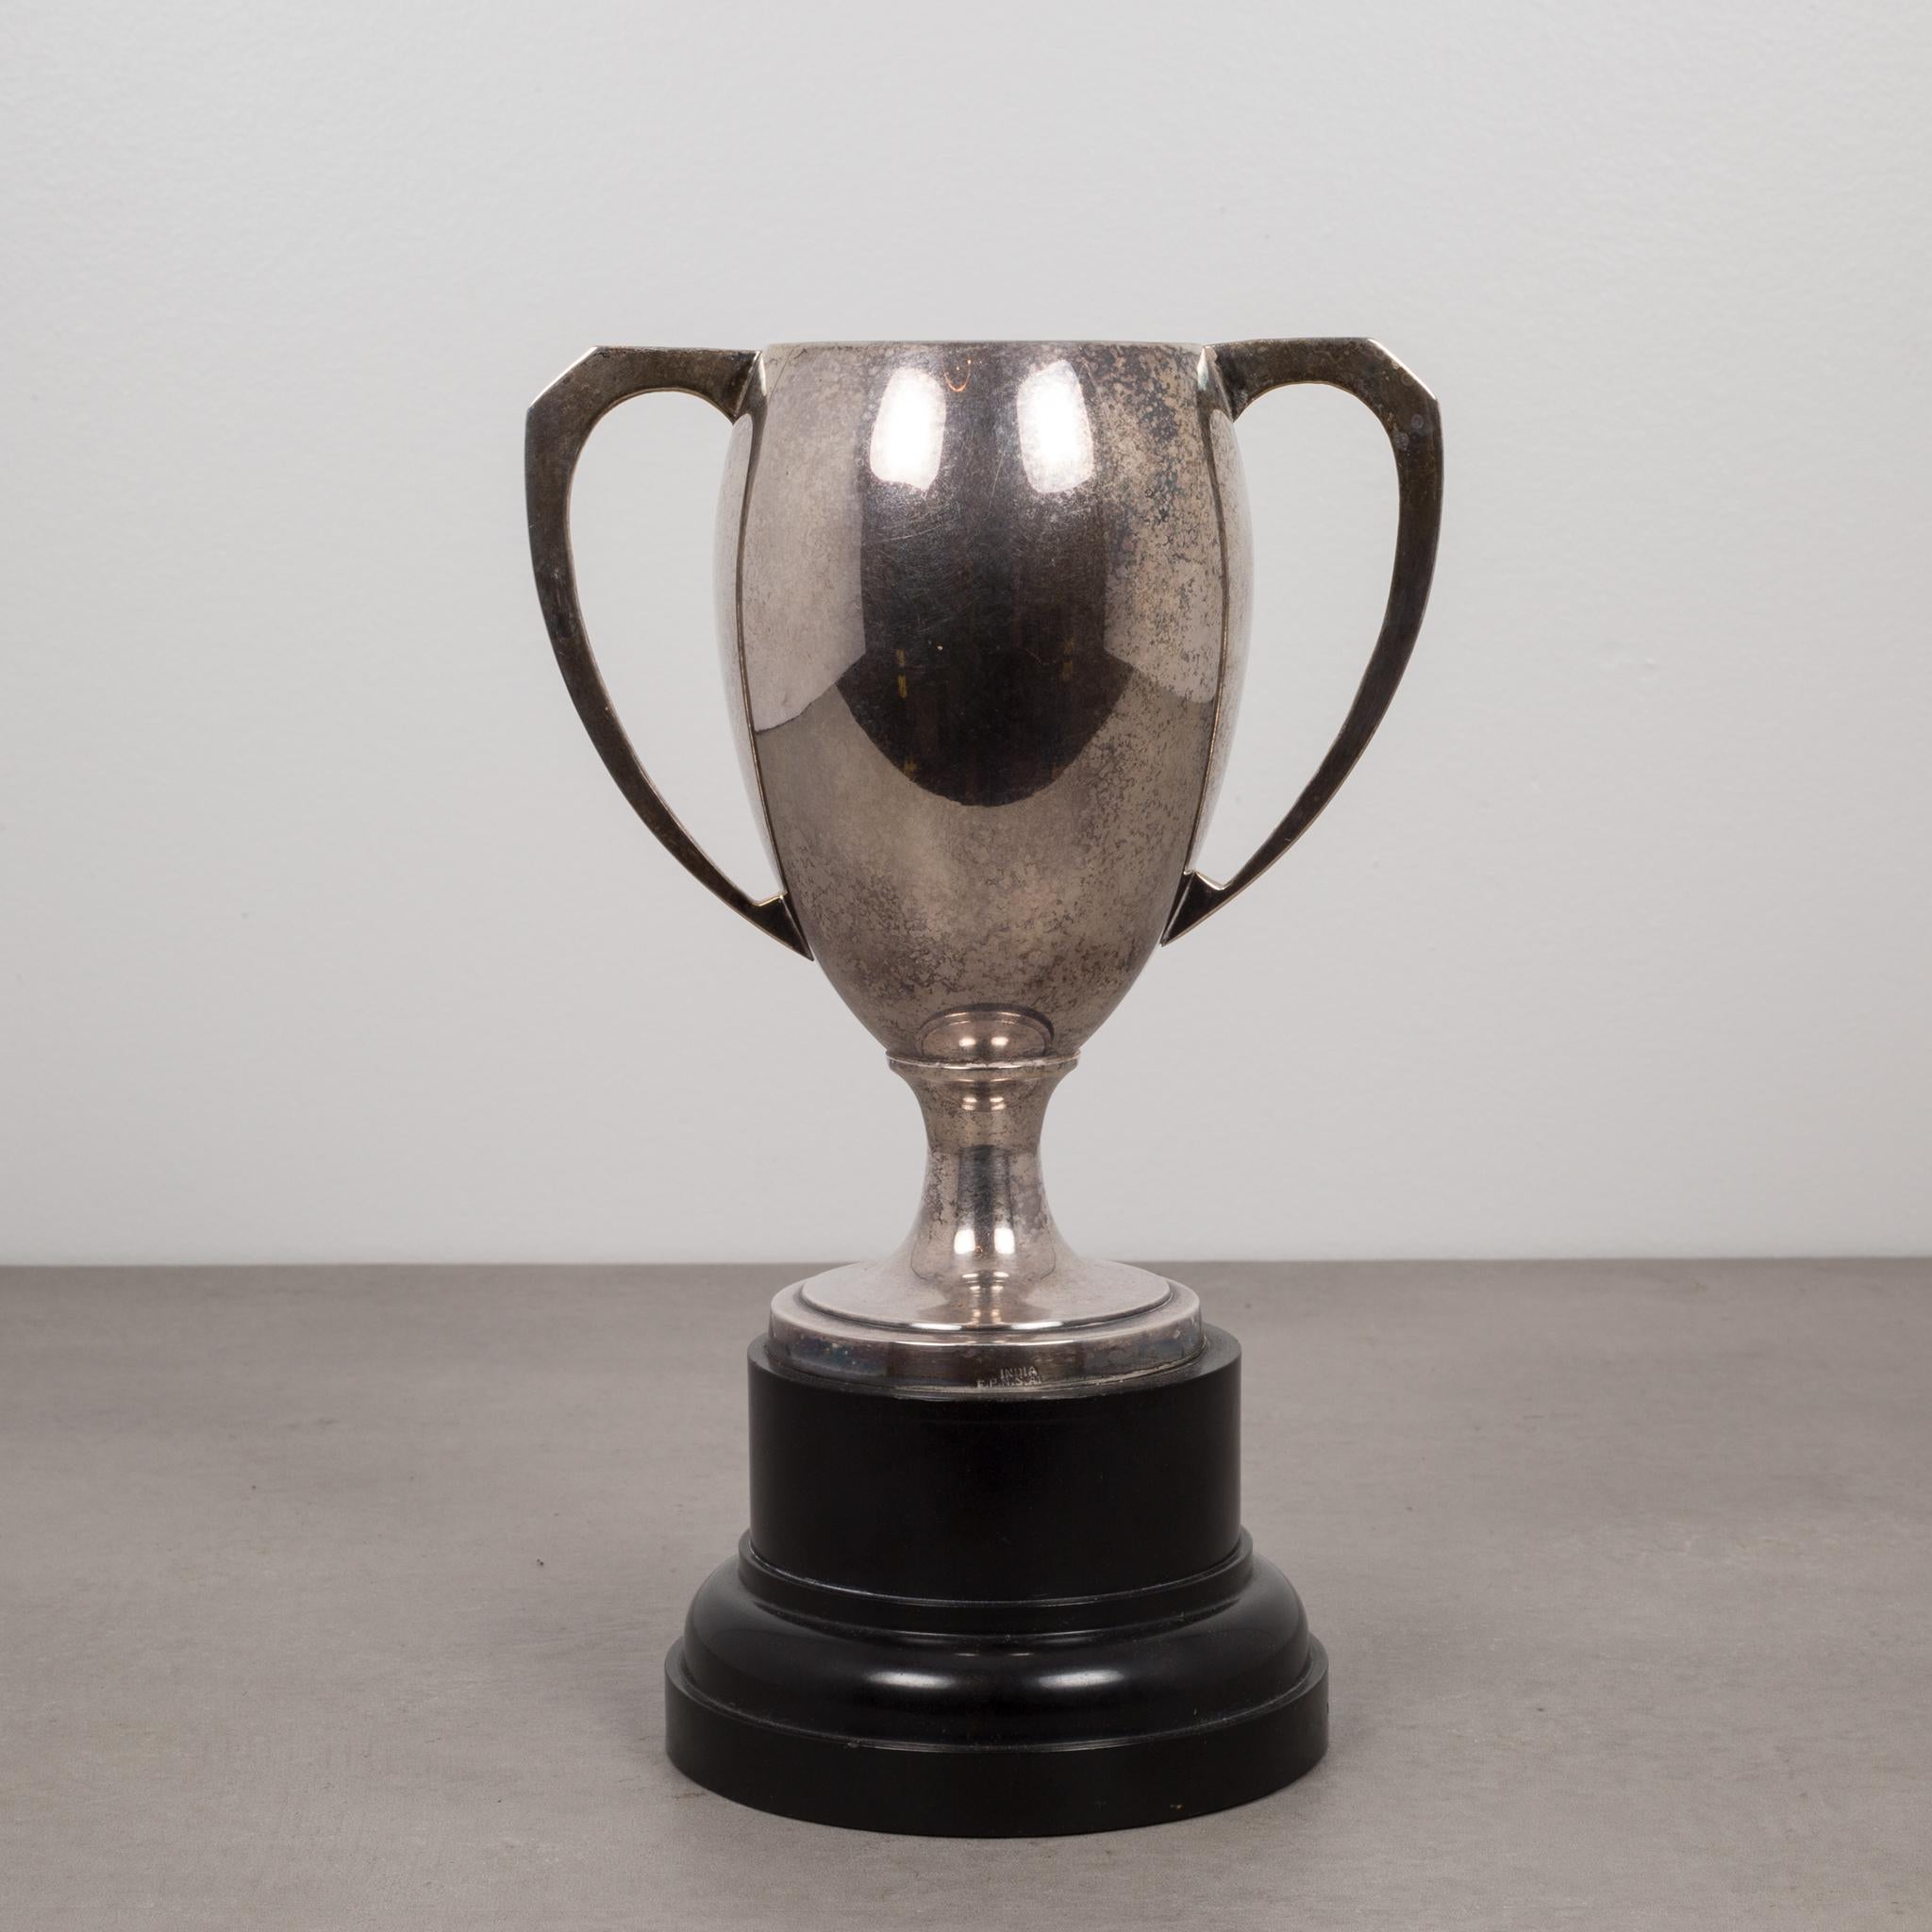 American Mid-century Silver Plated Loving Cup Trophy, 1972